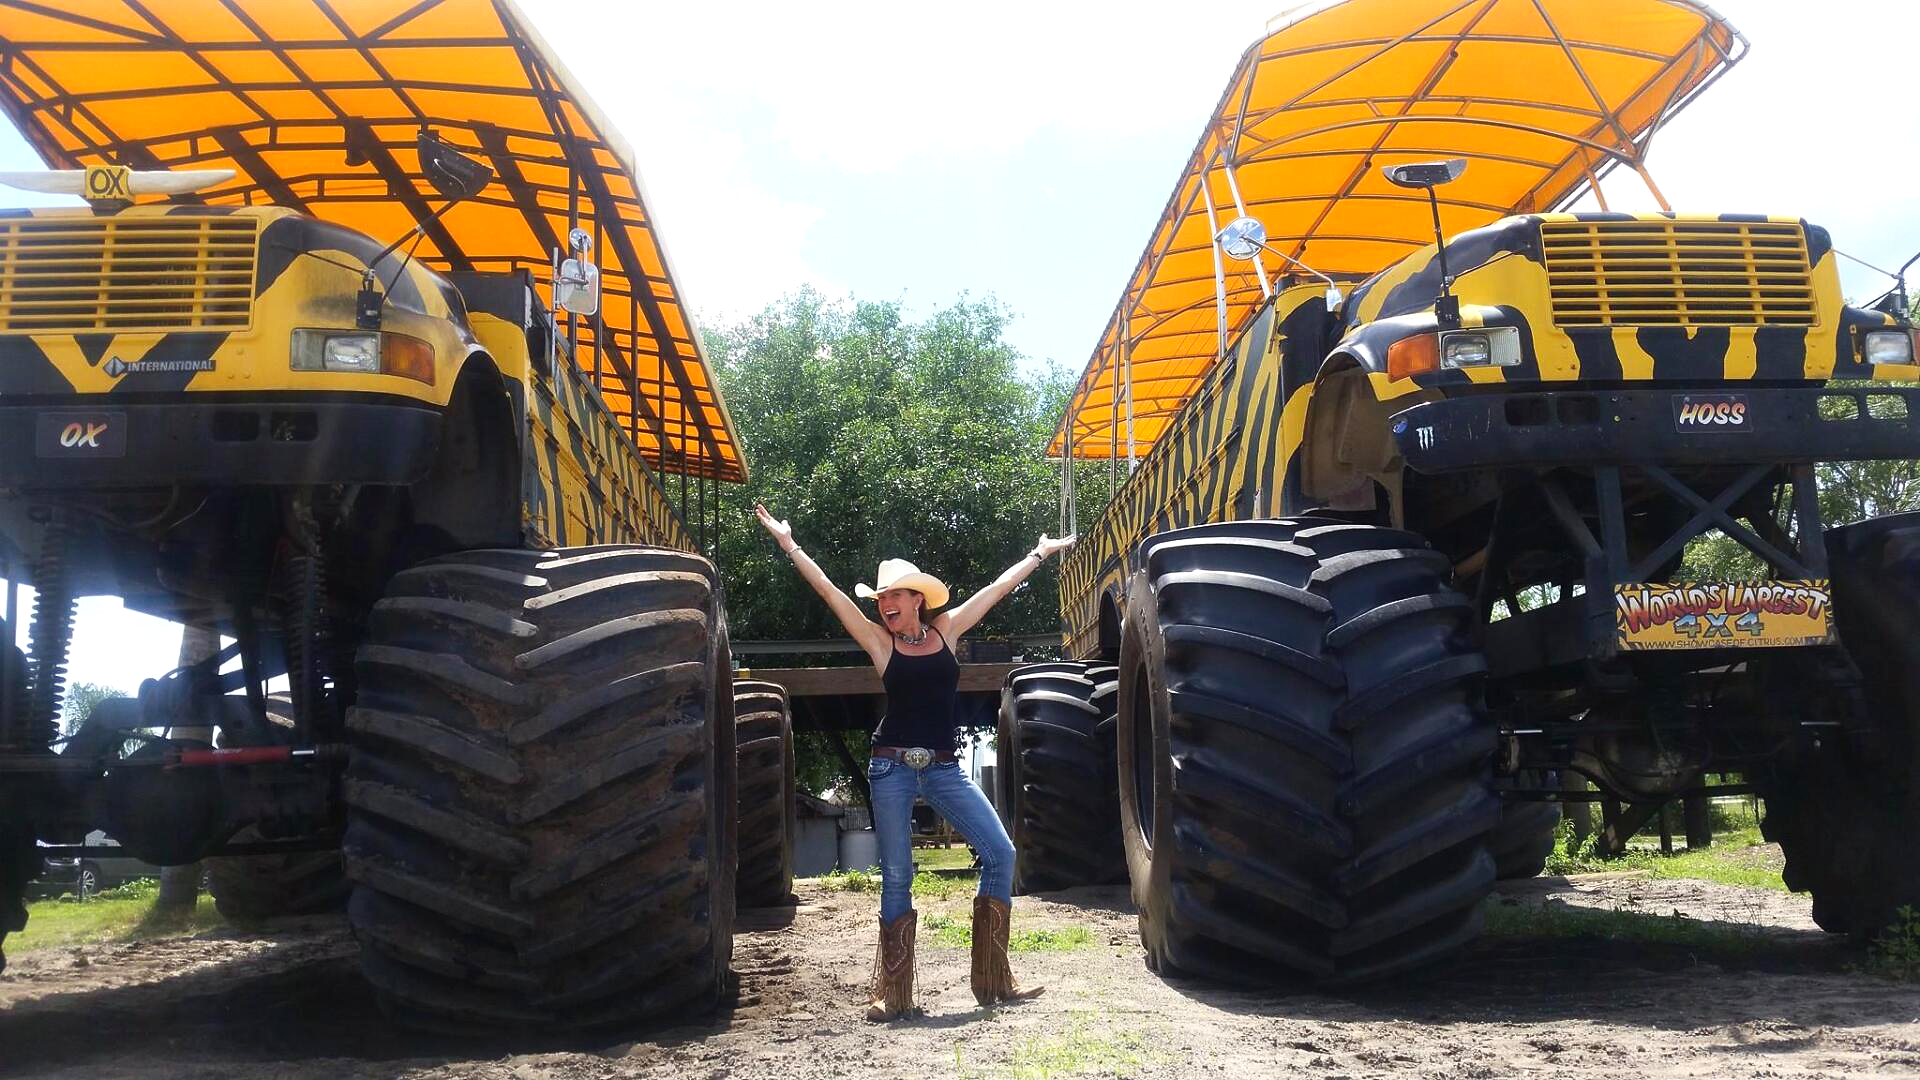 World's Largest Monster Truck Safari: world record in Clermont, Florida